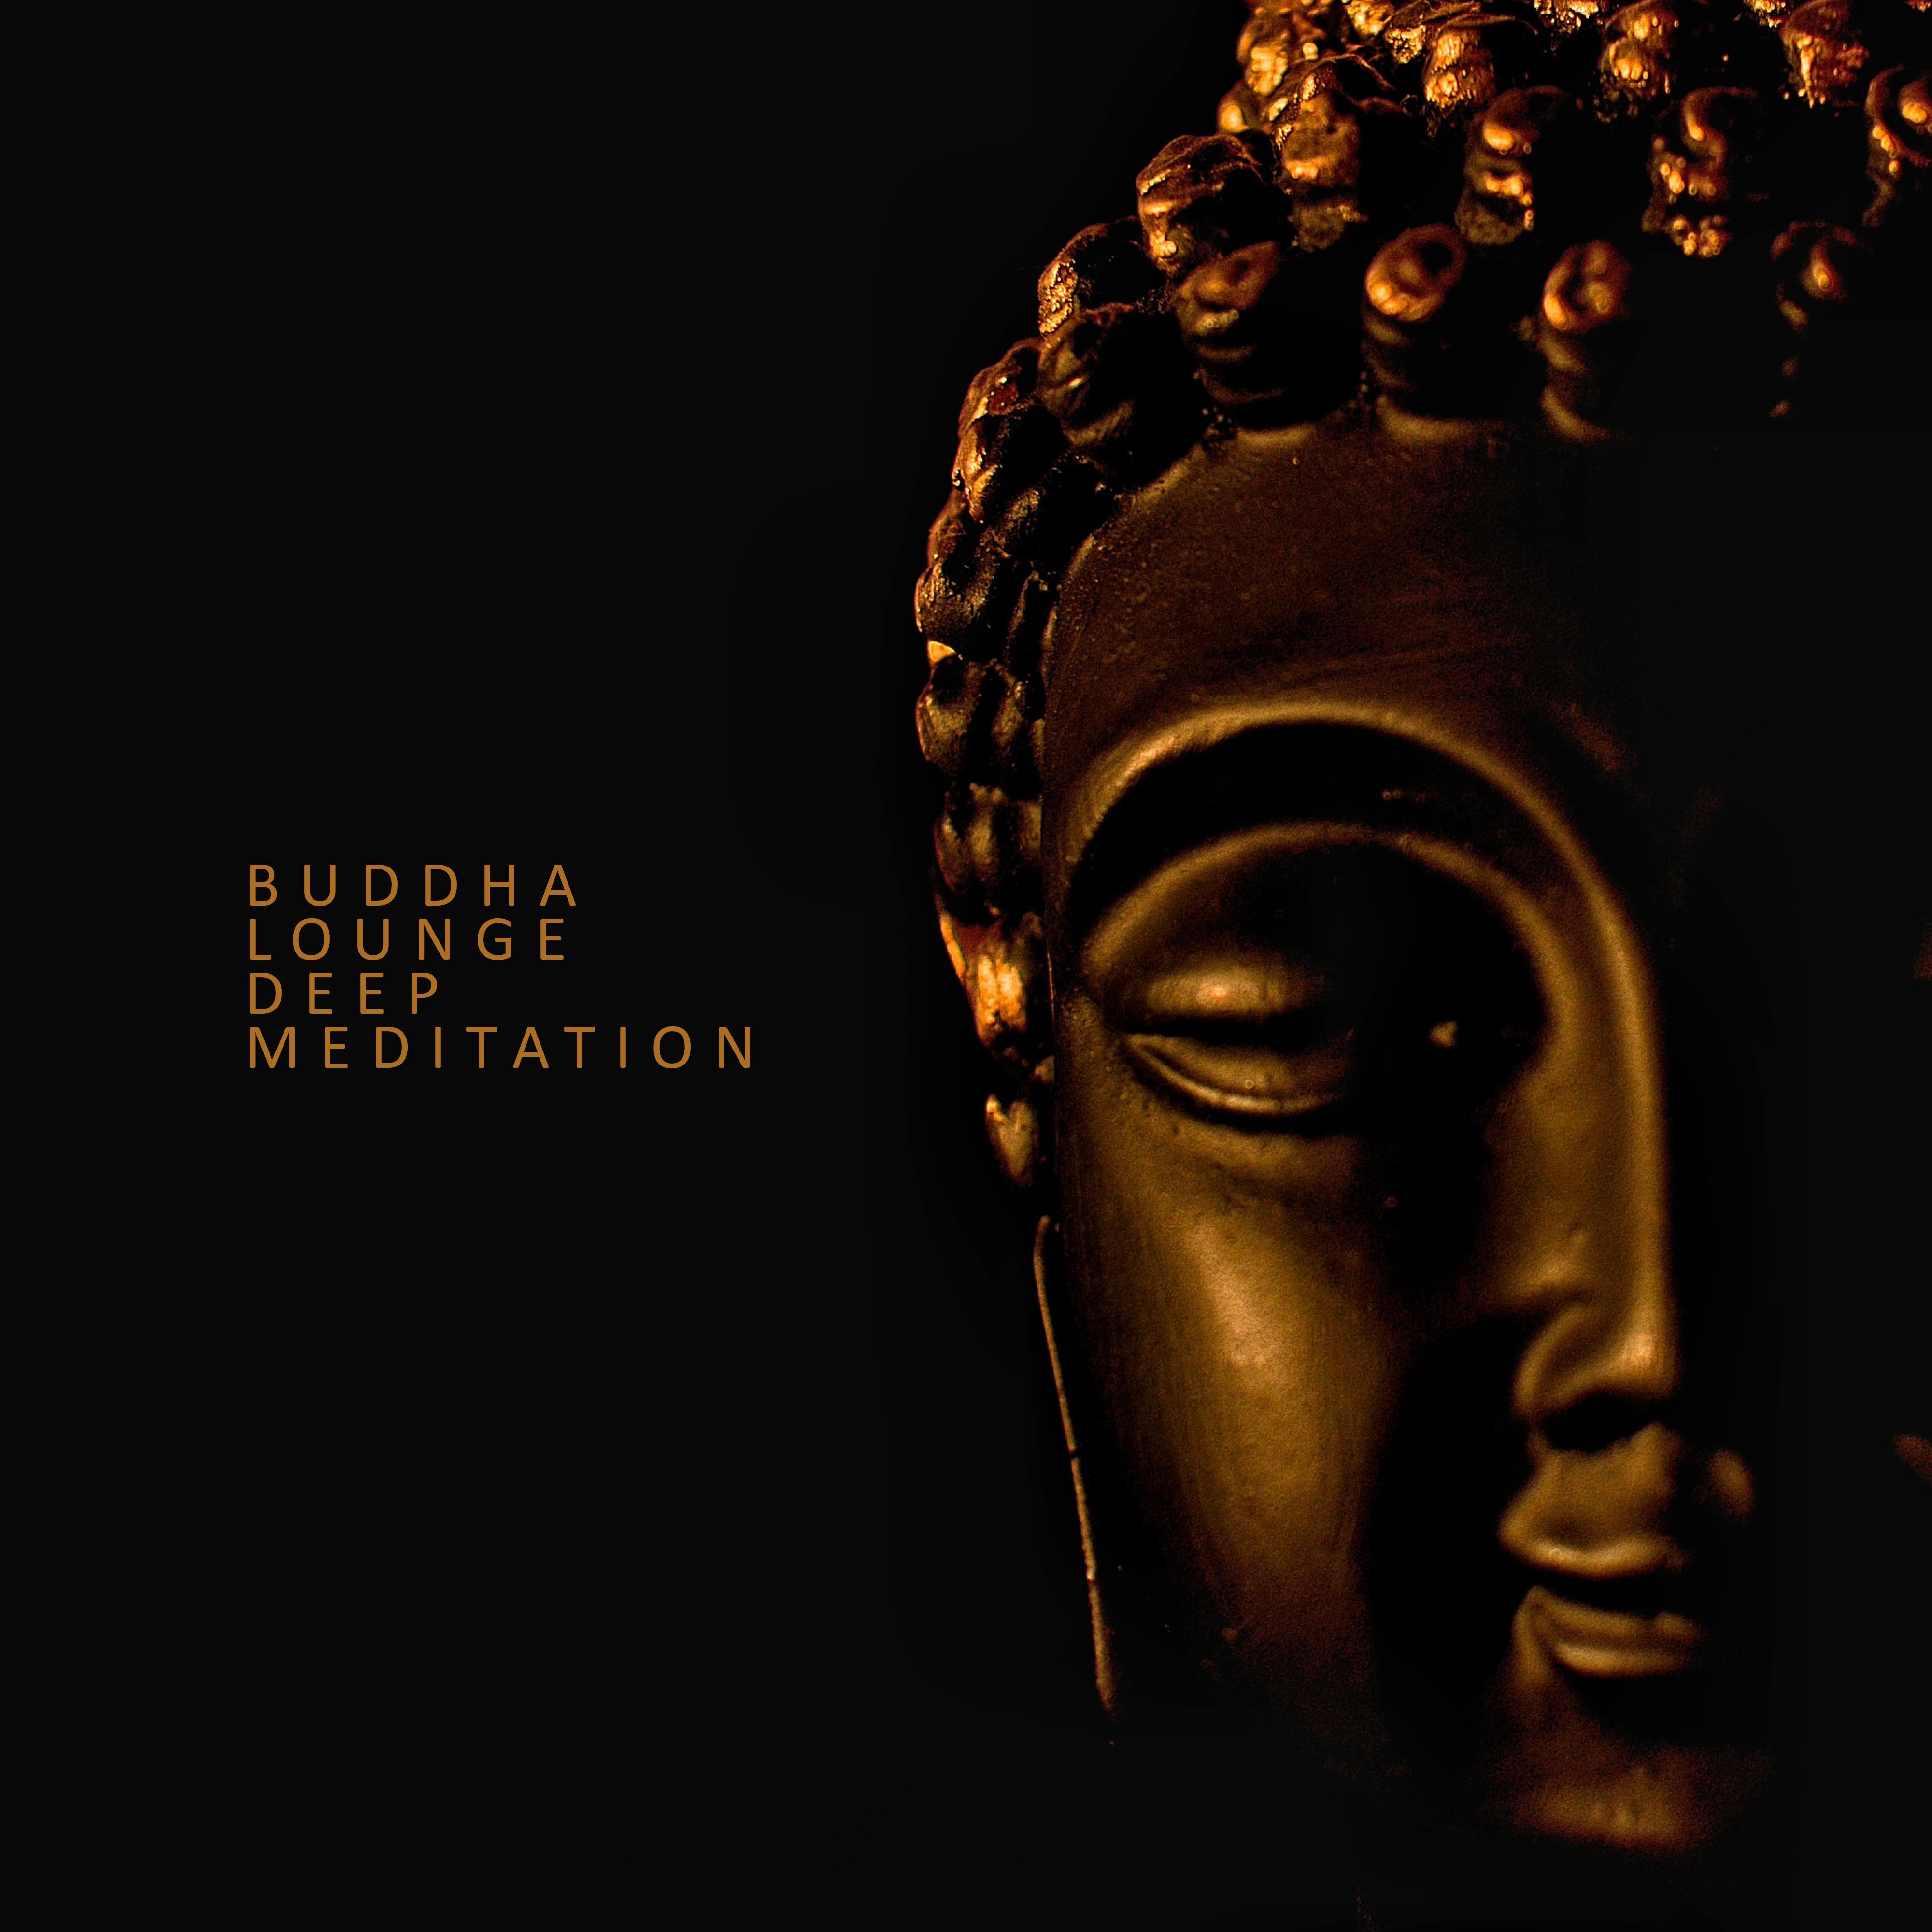 Buddha Lounge Deep Meditation: Mix of Best 2019 New Age Music for Deep Yoga Contemplation & Relaxation, Train All Hard Poses, Vital Energy Increase